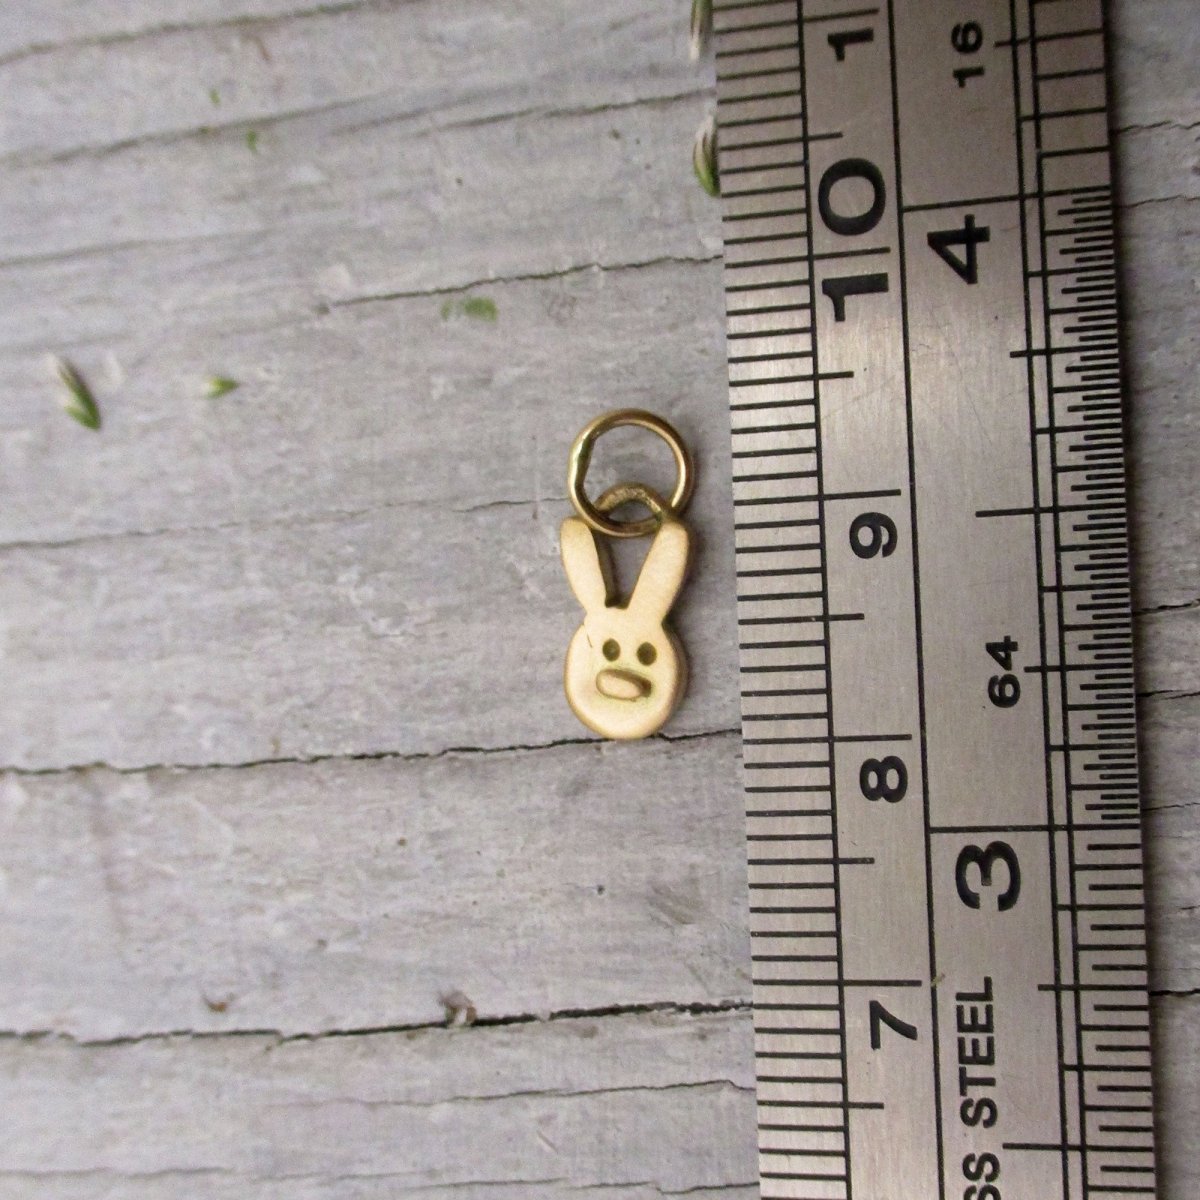 Bunny Face Charm, Year of the Rabbit Charm in 14K Yellow Gold - Luxe Design Jewellery